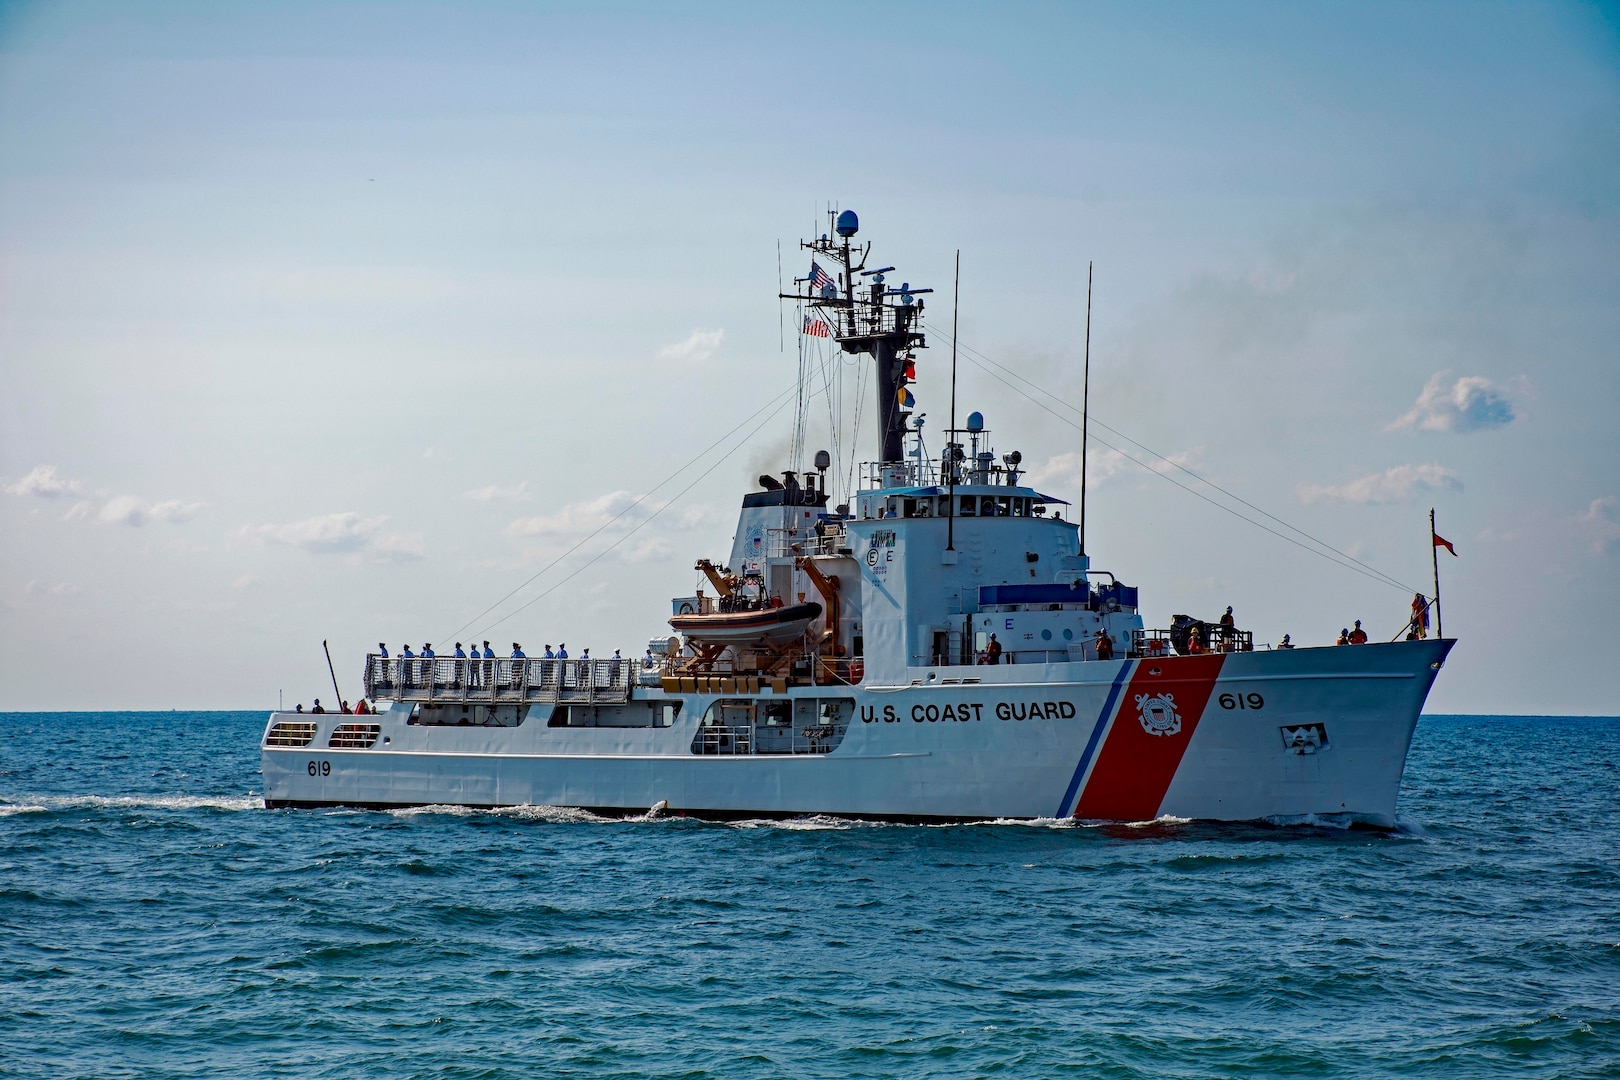 The Coast Guard Cutter Confidence is shown on a patrol in April 2018. The Confidence is a 210-foot medium endurance cutter homeported out of Cape Canaveral, Florida. (Coast Guard photo)